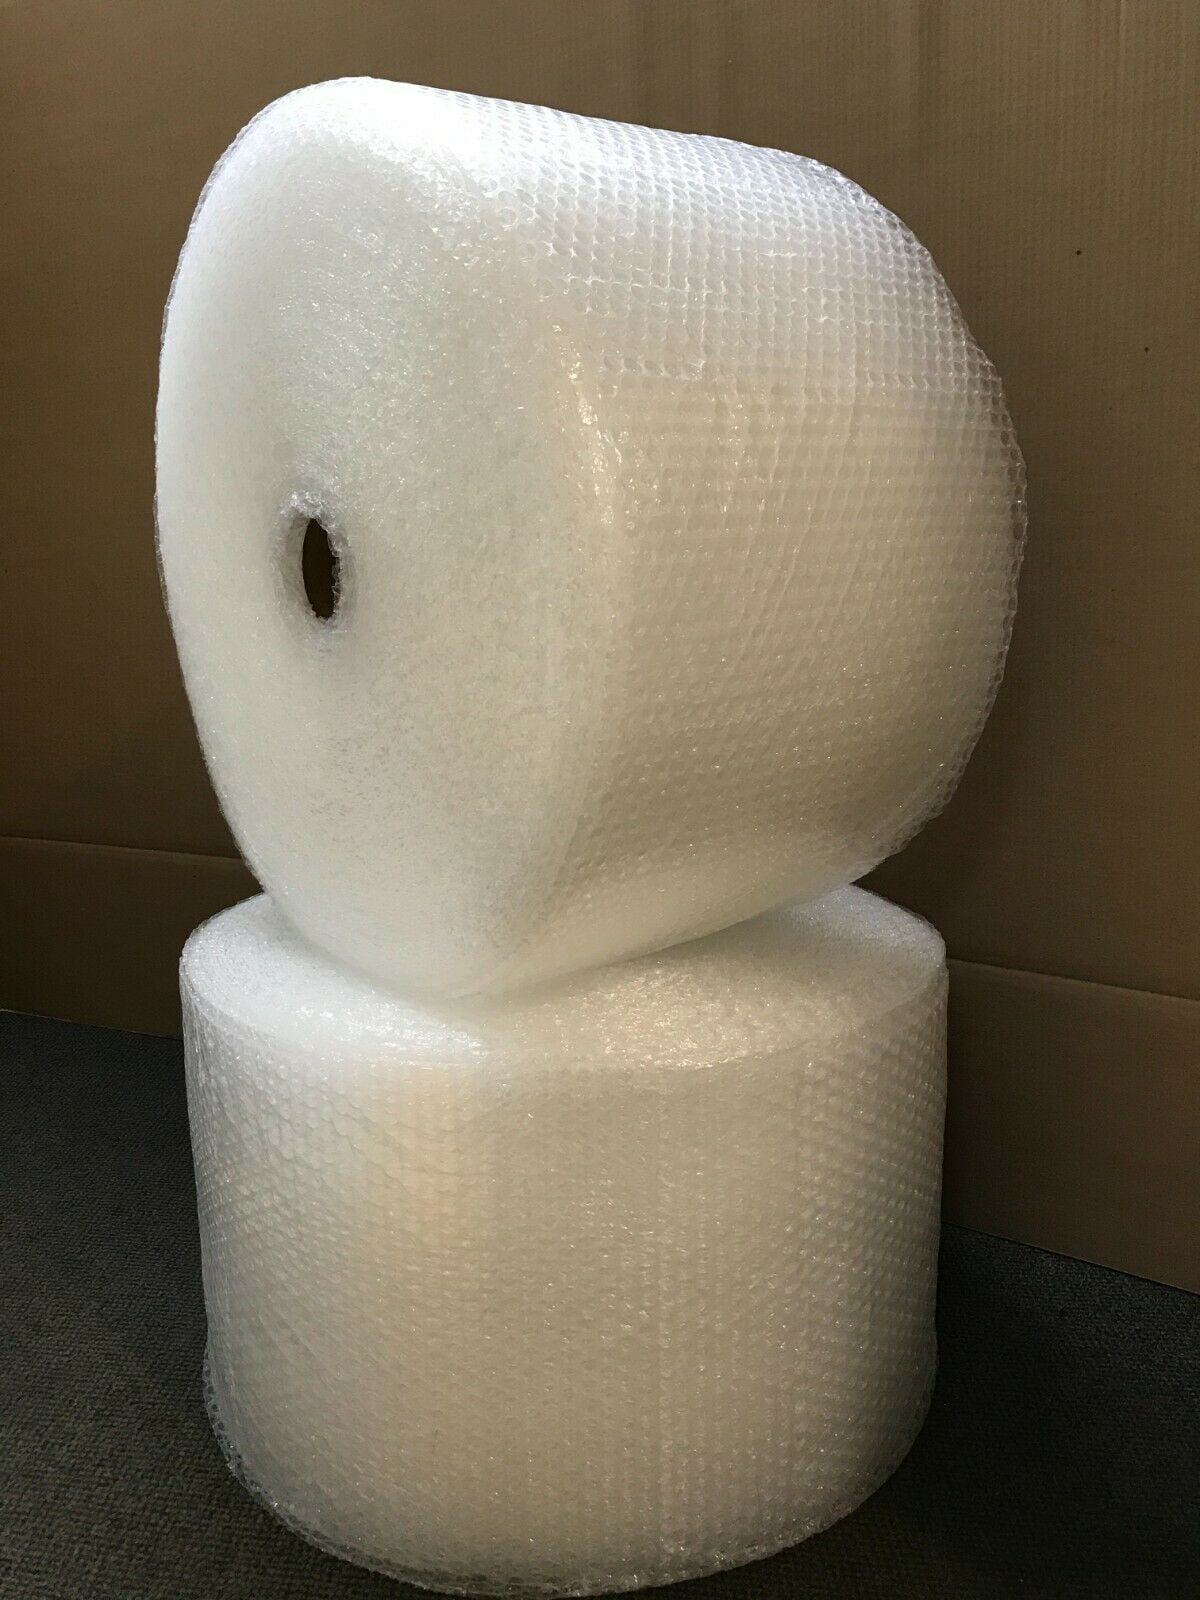 Wrap Cushion Perforated 12" Small Bubble Roll 3/16 x 175ft x 24 Inch Bubble 